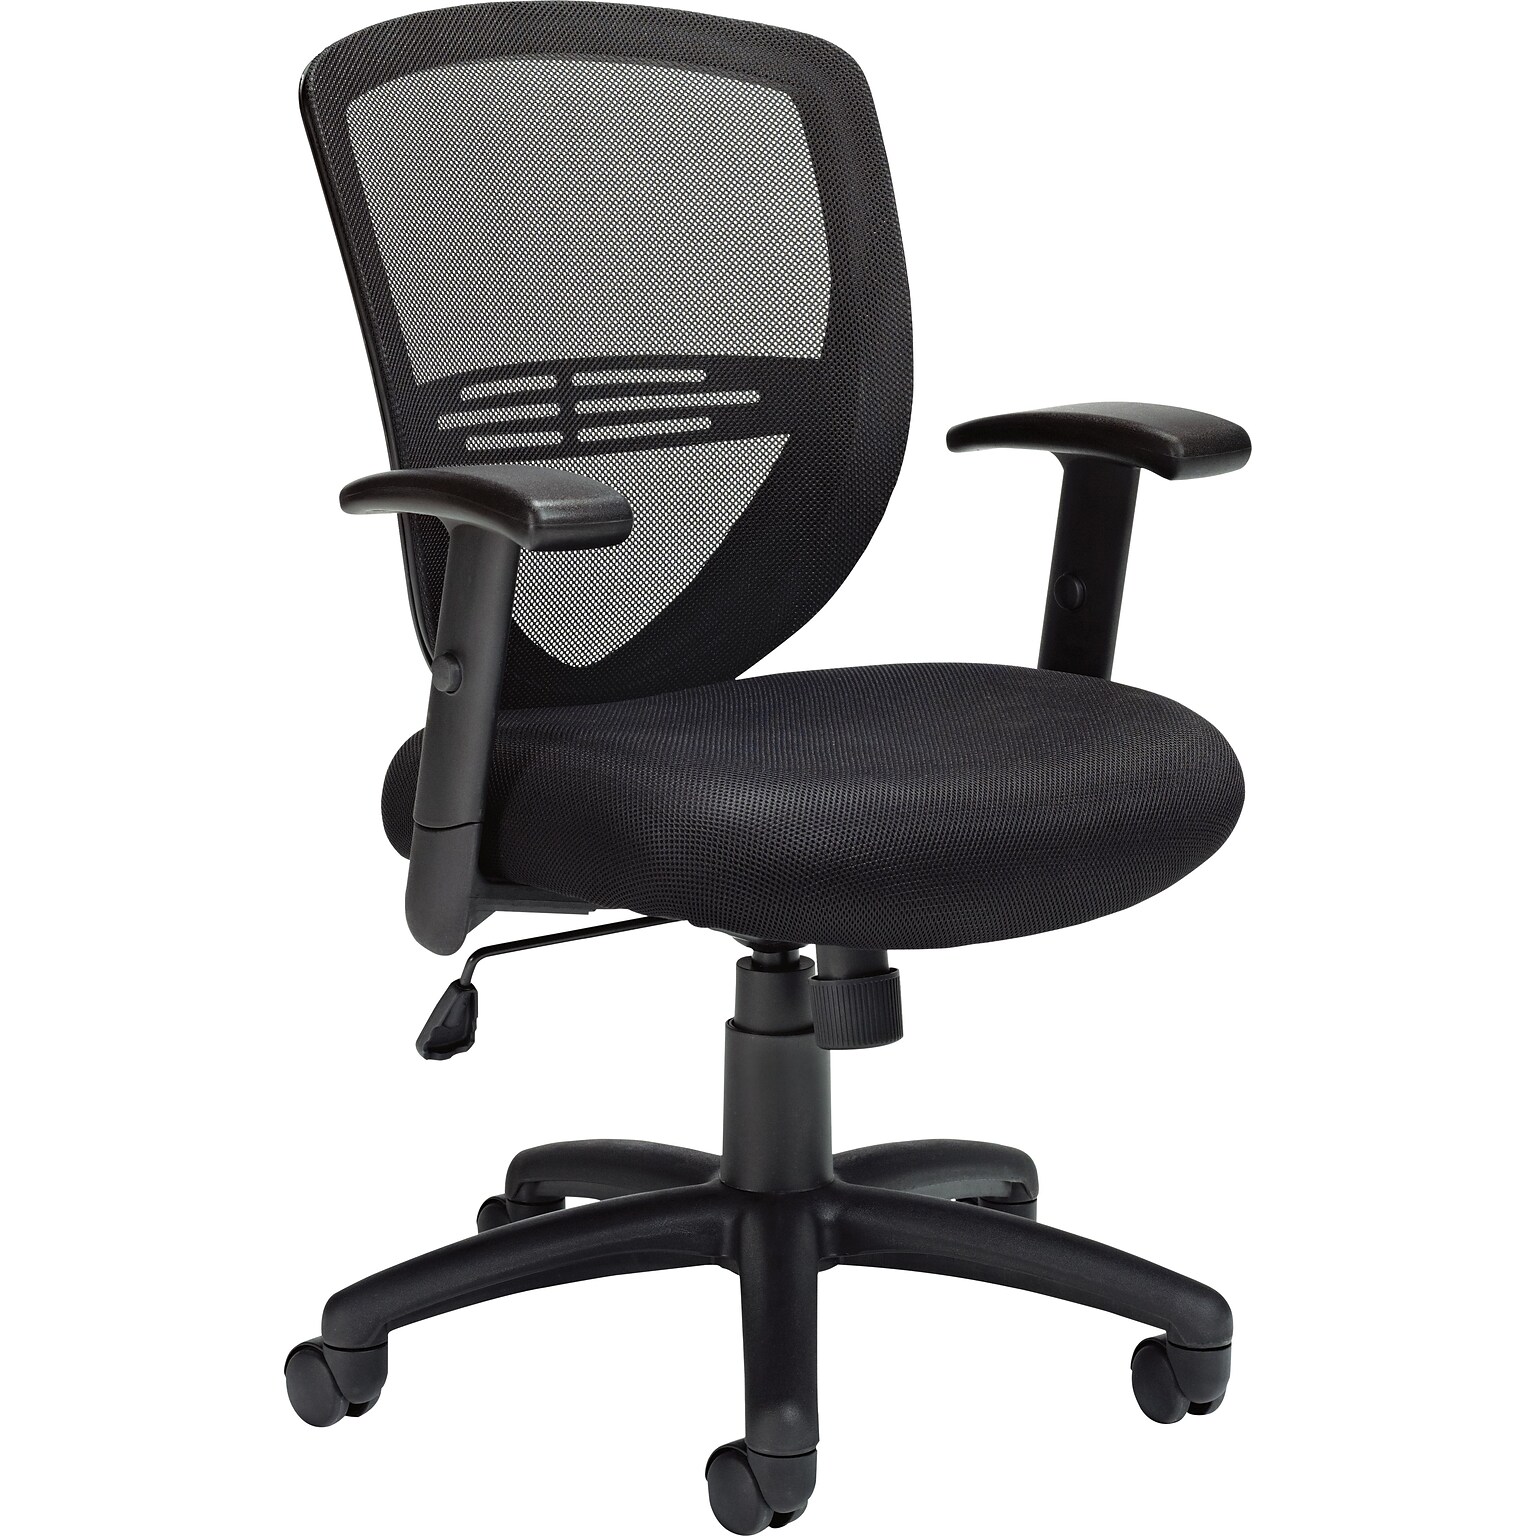 Offices To Go® Managers Chair, Mesh, Black, Seat: 20W x 17 1/2D, Back: 18 1/2H x 18 1/2W